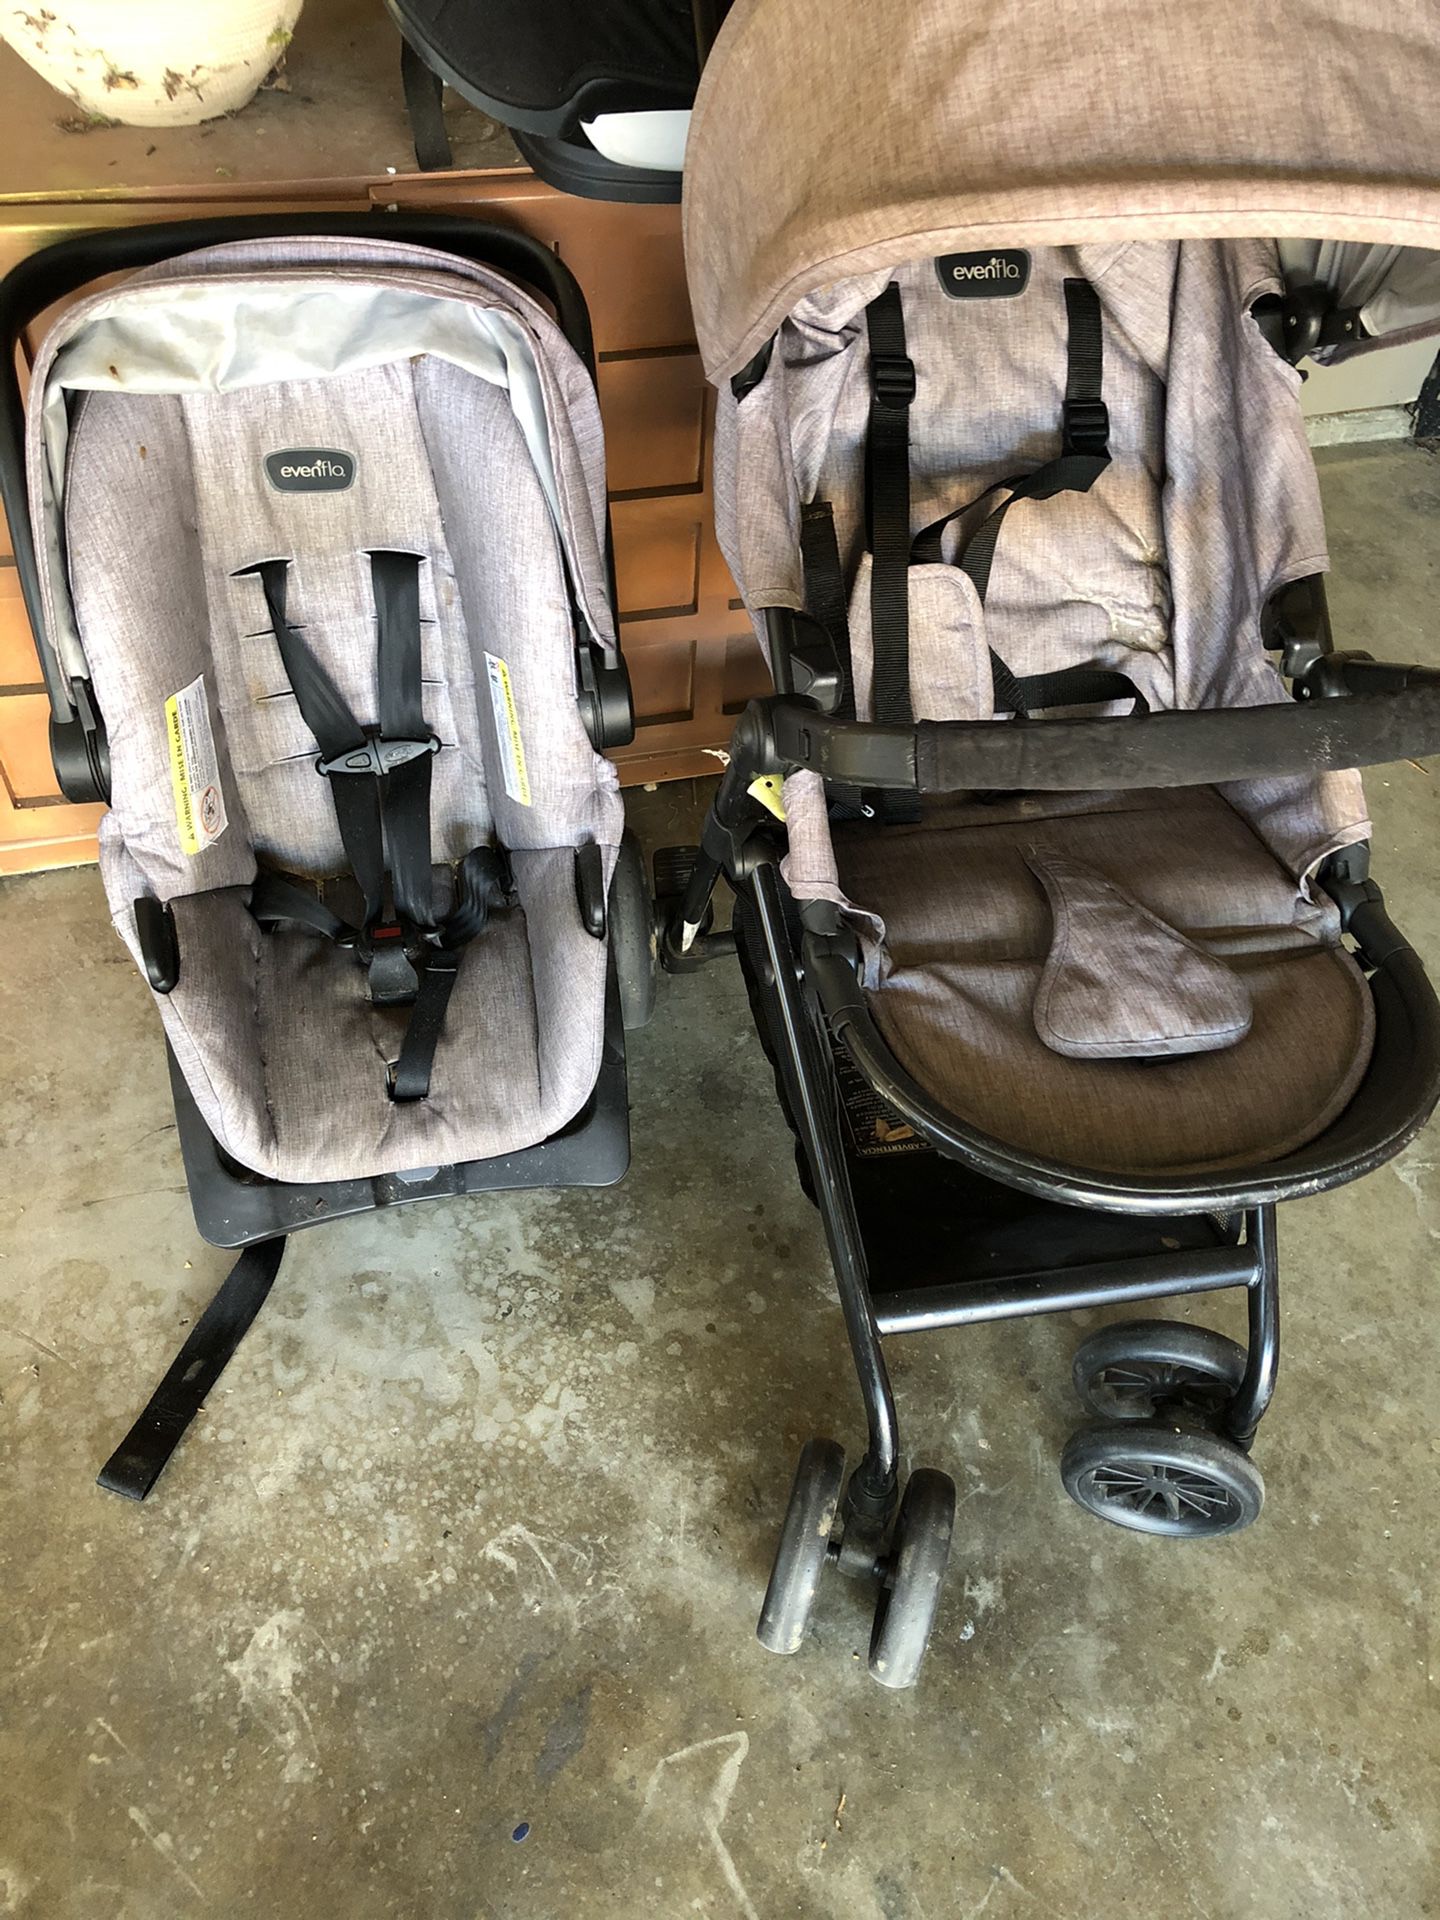 FREE Evenflow Car seat, Base, and matching Stoller